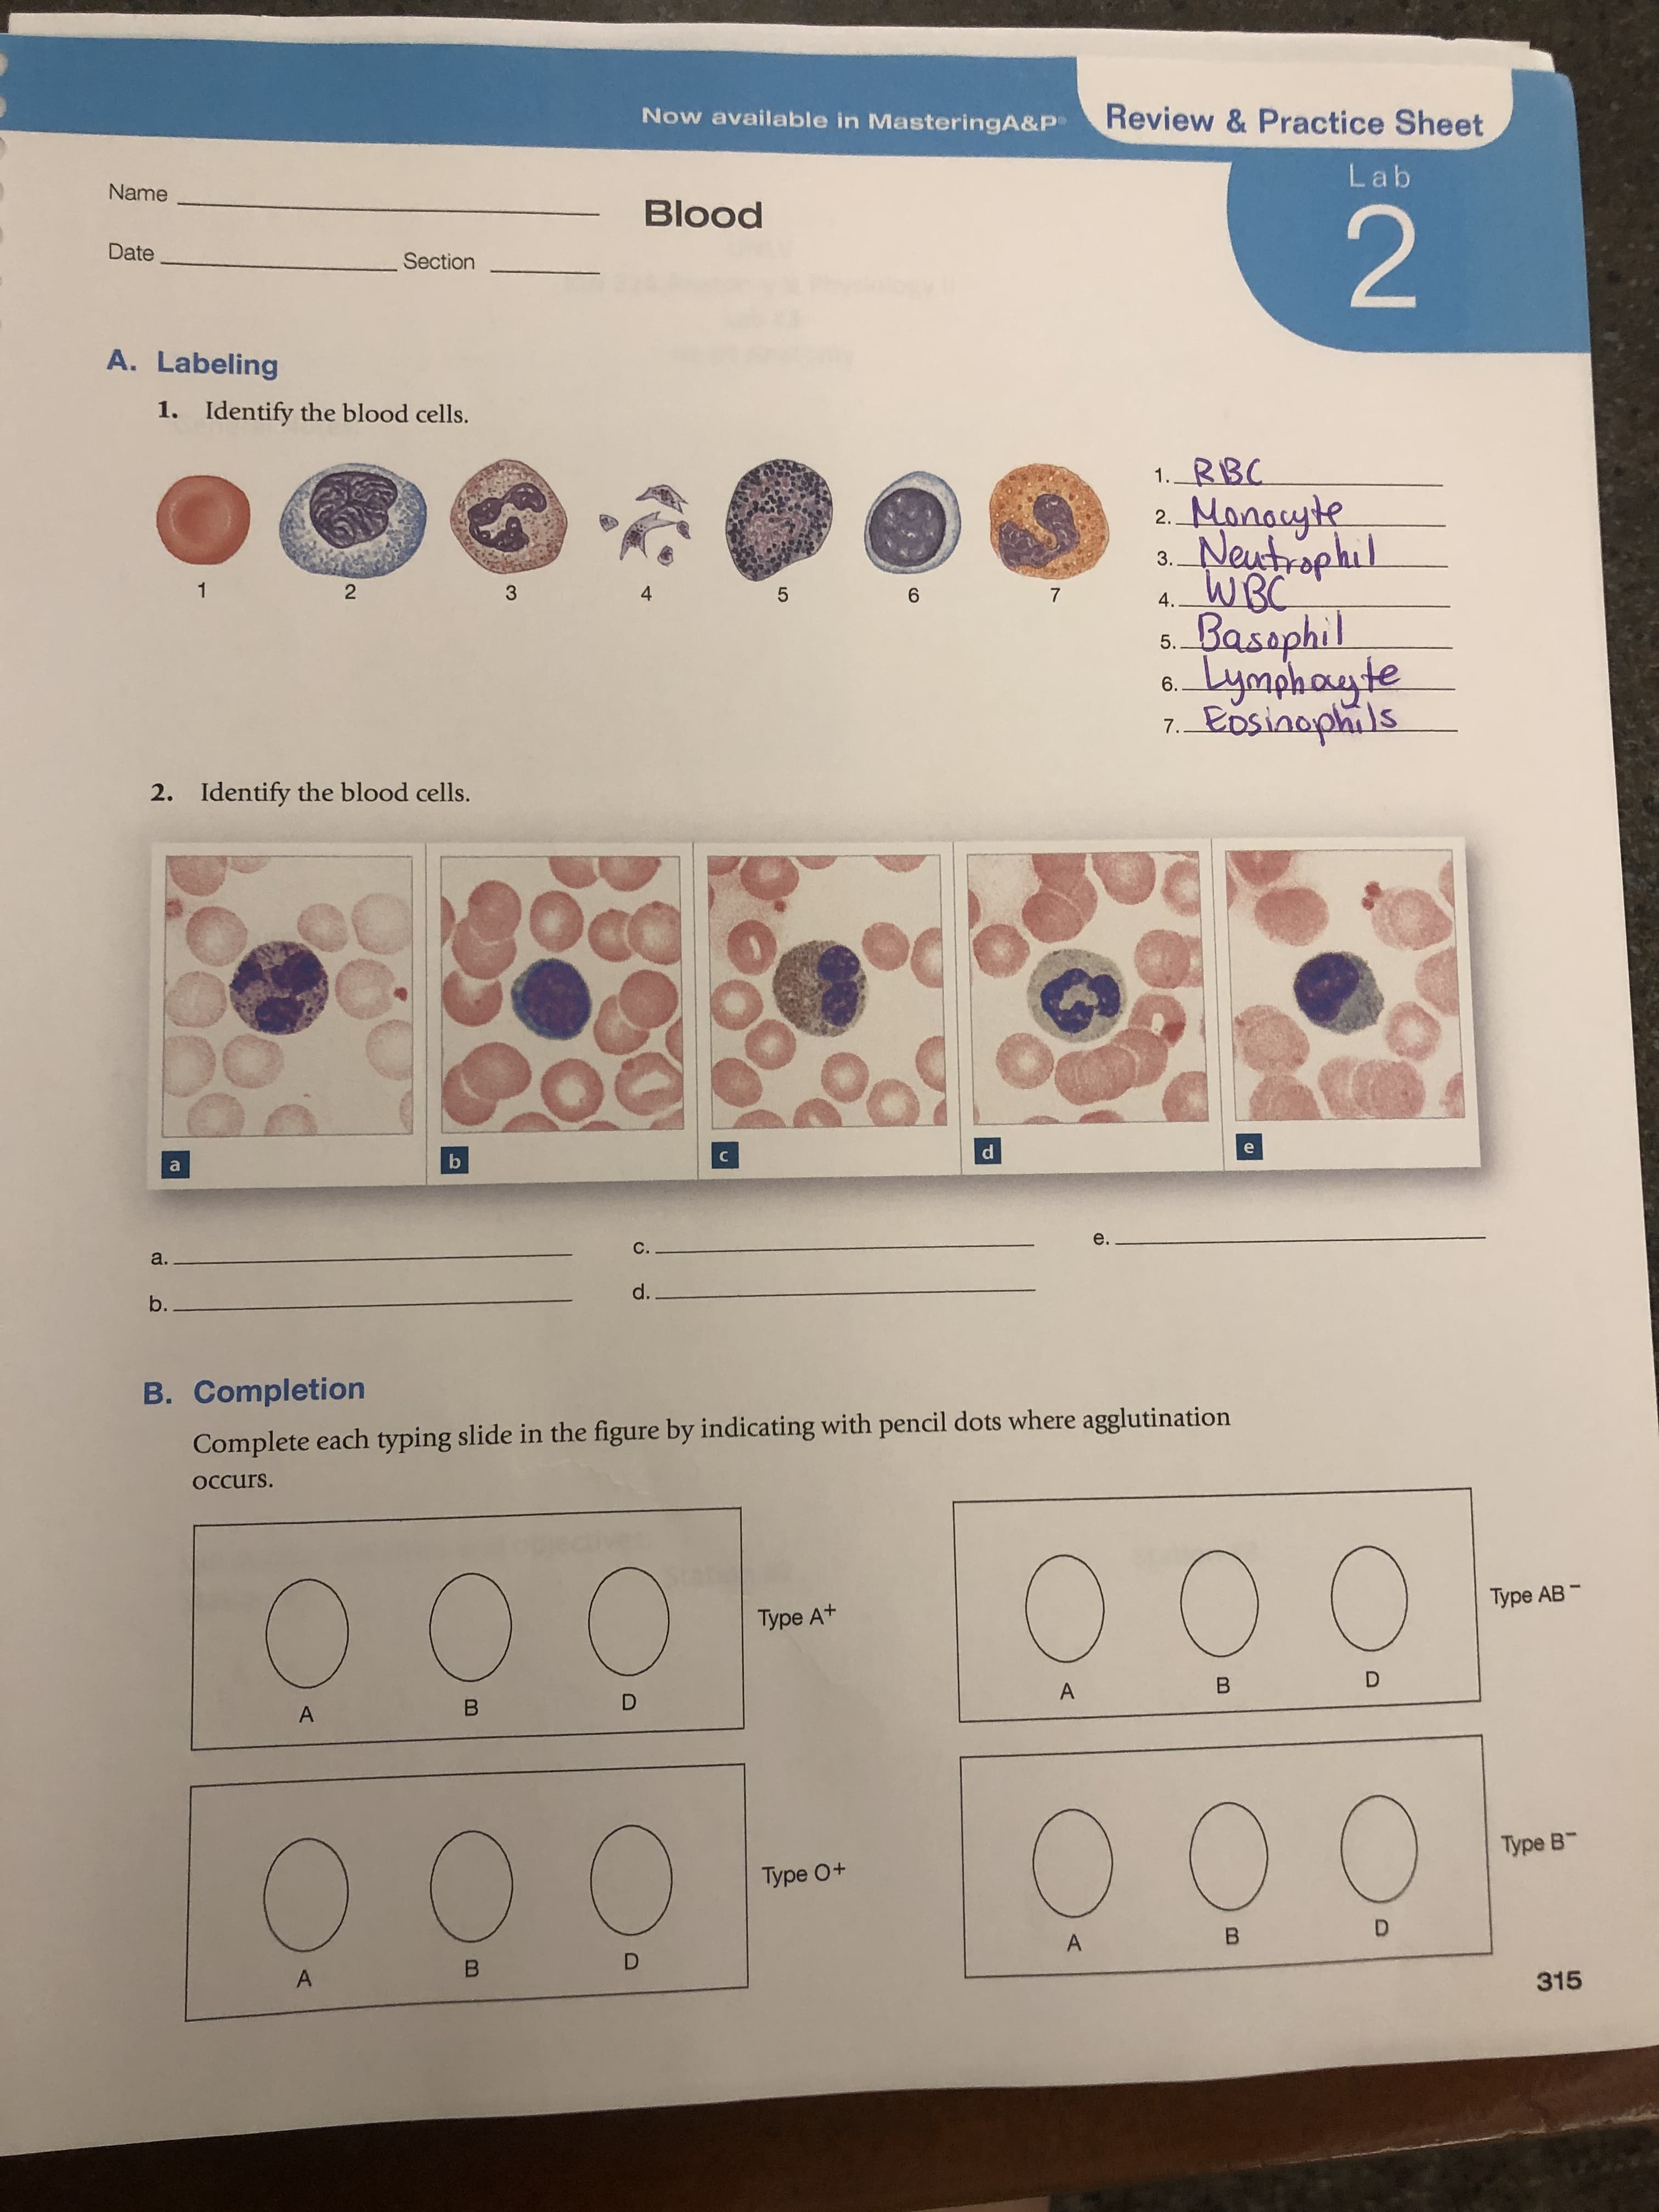 Review&Practice Sheet
Now available in MasteringA&P
Lab
Name
Blood
2
Date
Section
A. Labeling
Identify the blood cells.
1.
RBC
1.
Manayte
Neustrophul
WBC
Basaphil
Lynhayte
PDsinophils
2.
3.
1
2
4
3
7
6
4.
5.
6.
7.
Identify the blood cells.
2.
a
e.
C.
a.
d.
b..
B. Completion
Complete each typing slide in the figure by indicating with pencil dots where agglutination
Occurs.
Туре АB -
Type At
D
B
A
D
B
A
Type B
Type O+
D
B
D
B
A
315
A
LO
